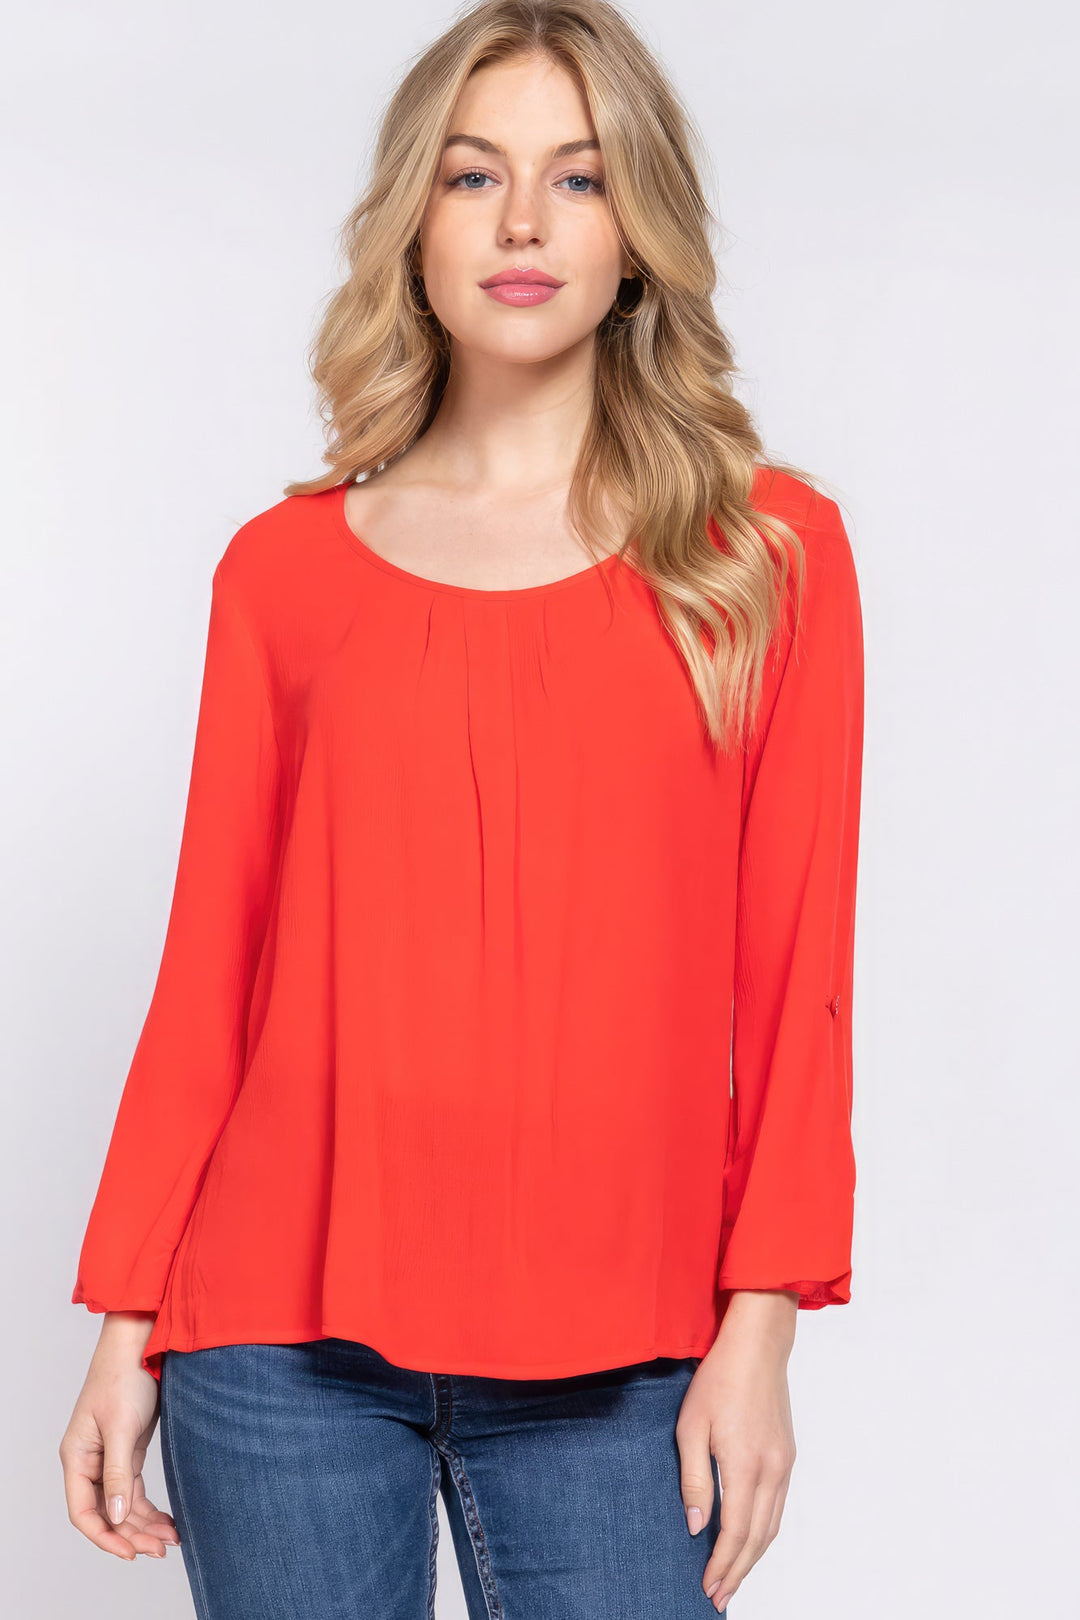 The802Gypsy  shirts and tops Tomato / S ❤GYPSY LOVE-Roll Up Slv Pleated Blouse